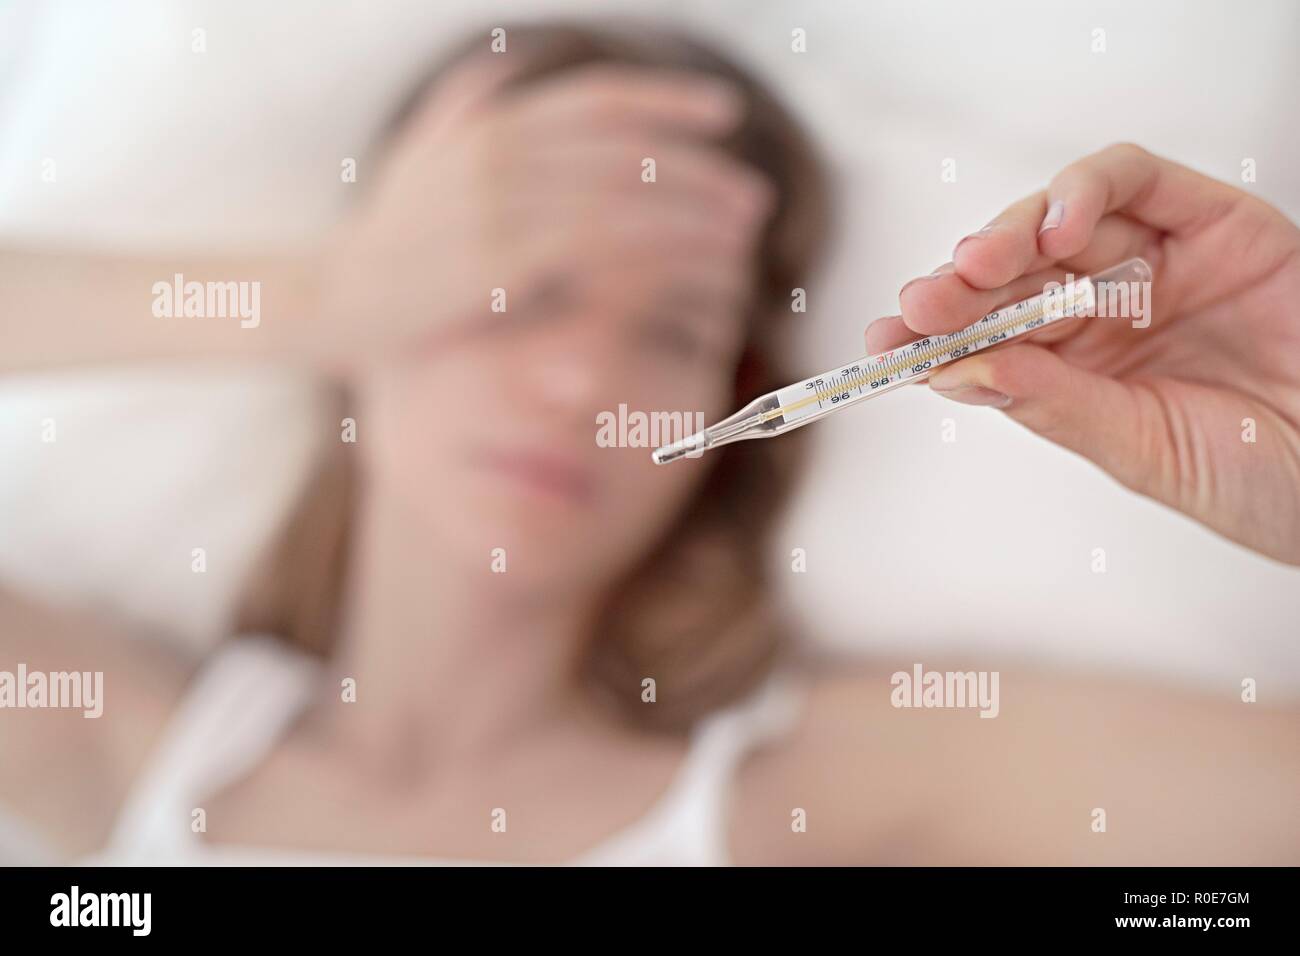 Young woman taking her temperature. Stock Photo